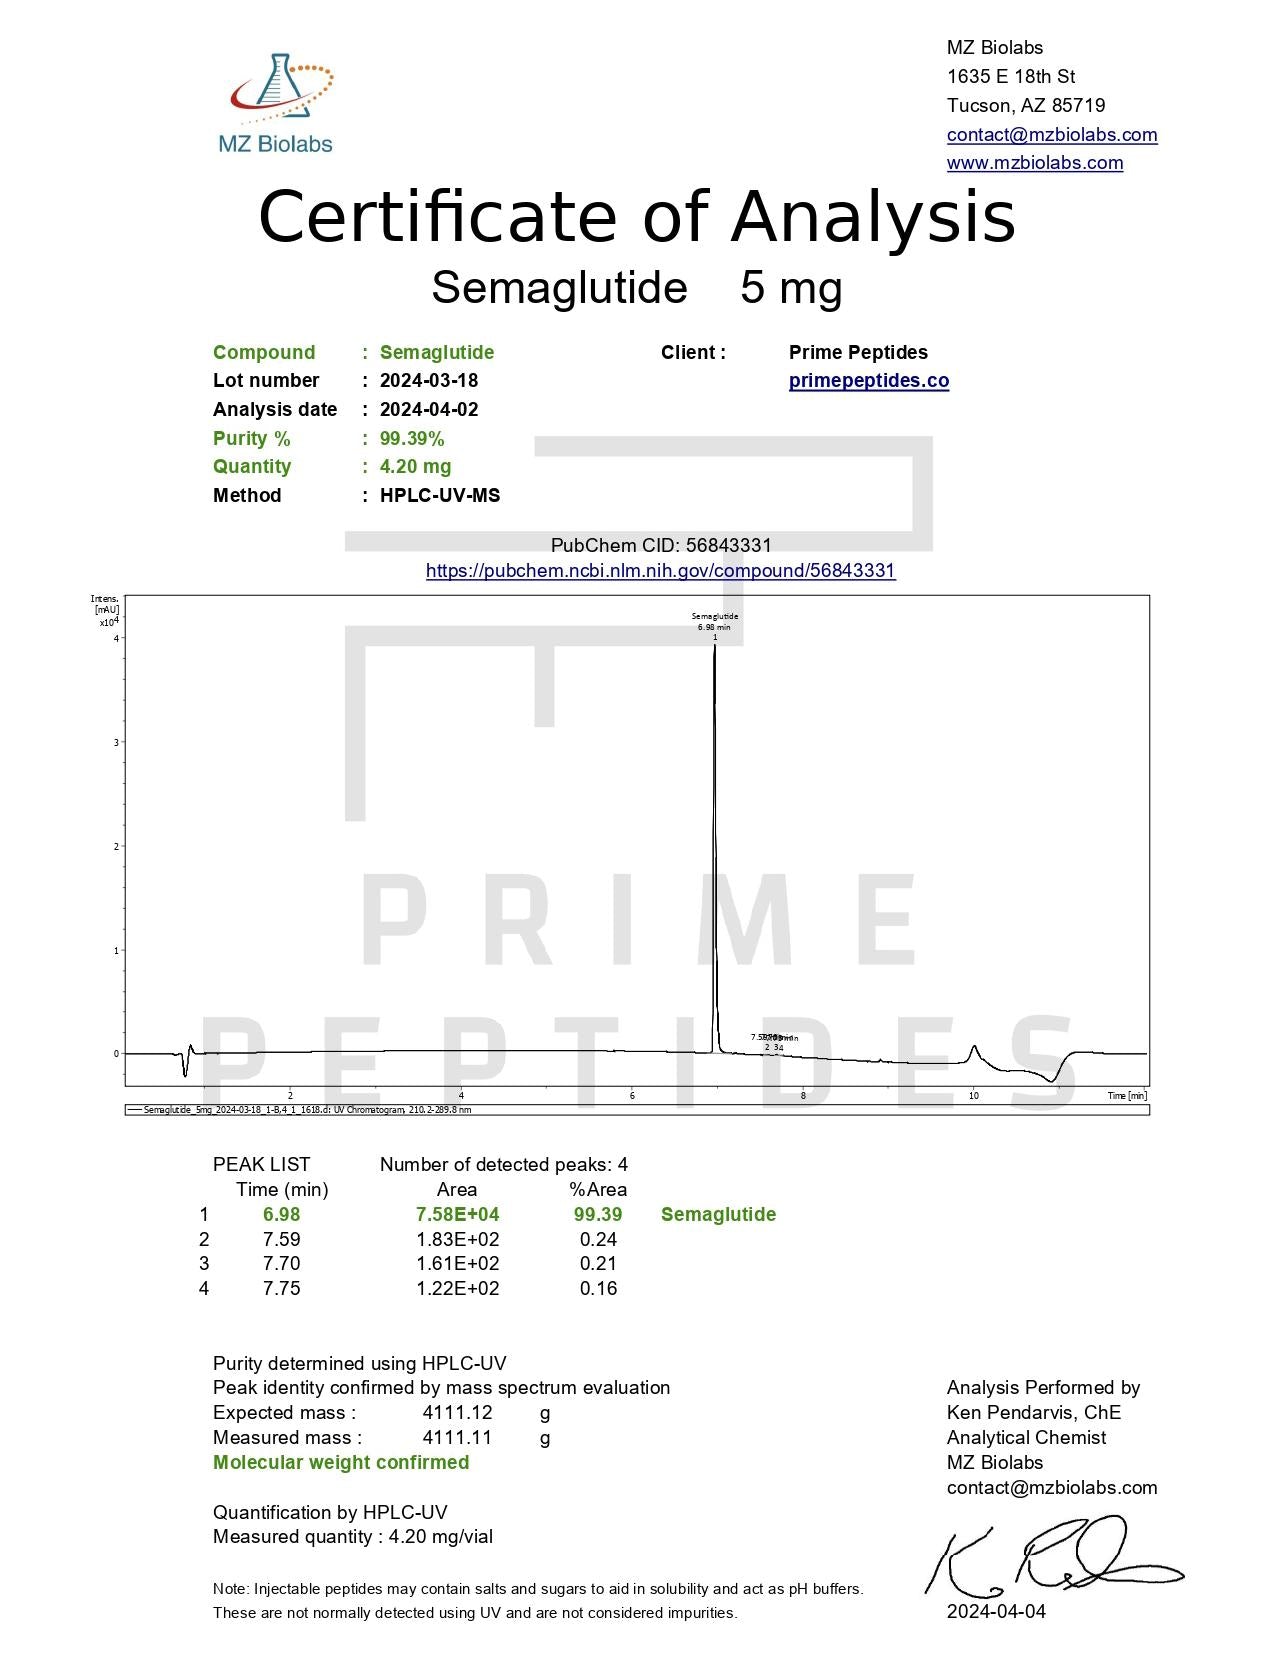 Semaglutide Certificate of Analysis